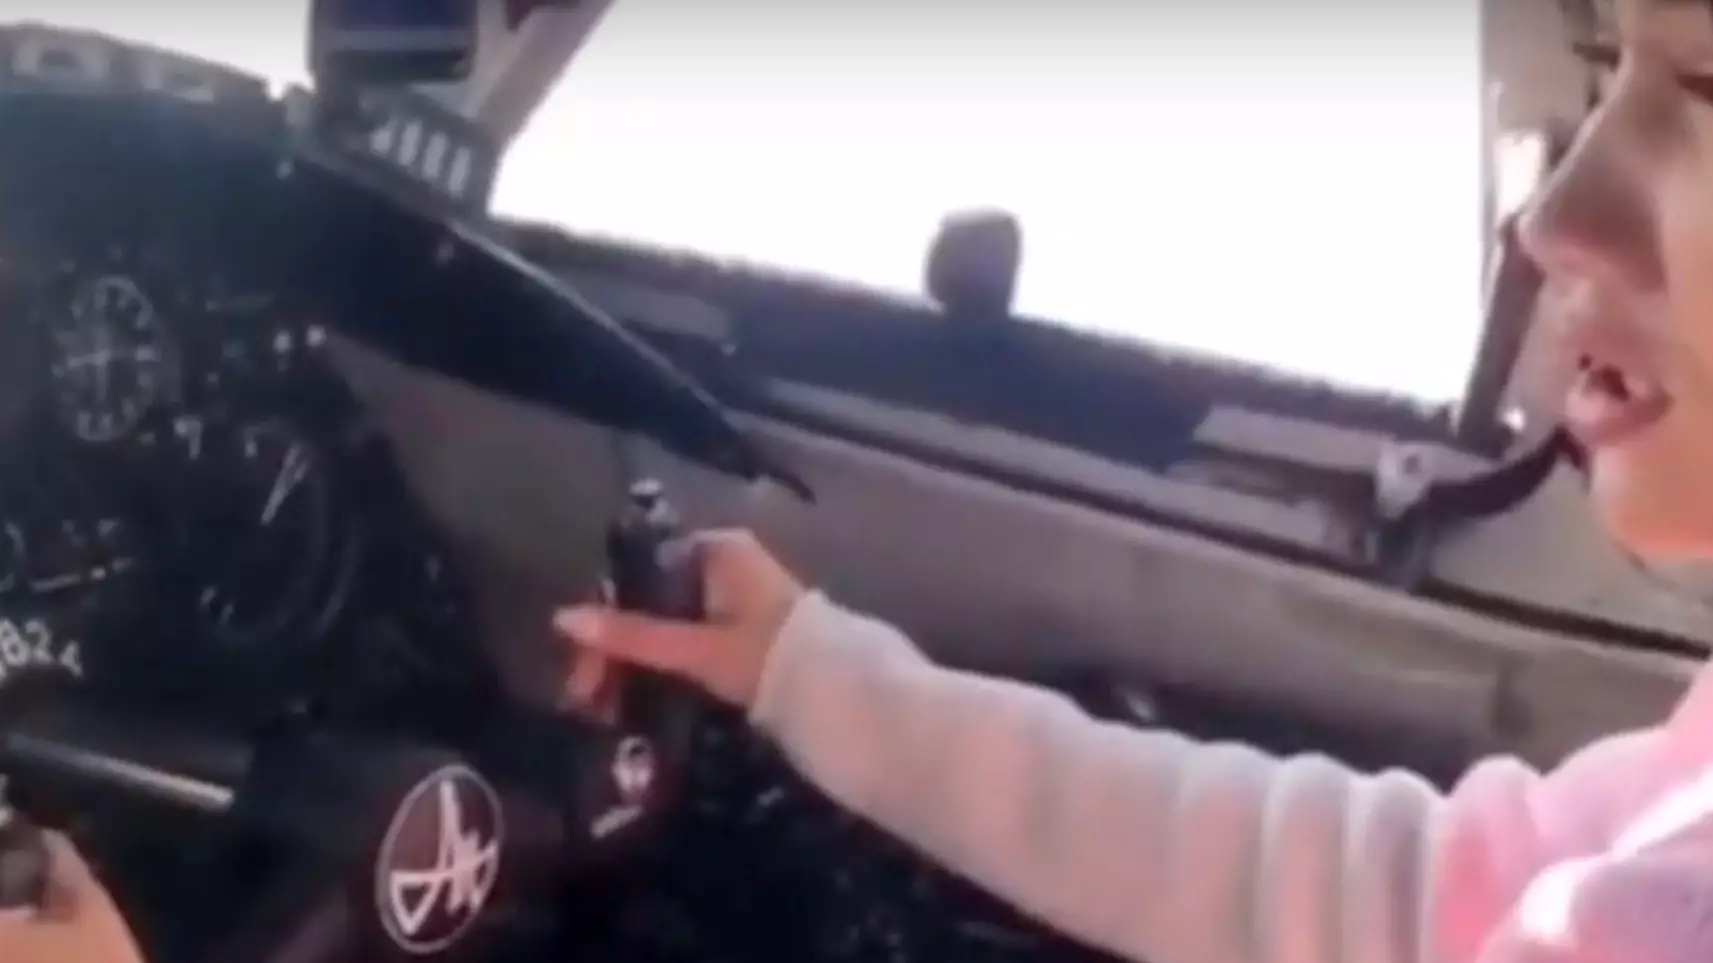 Russian Airline Investigates Footage Of Passenger ‘Flying Plane' While Pilot Gives Instructions